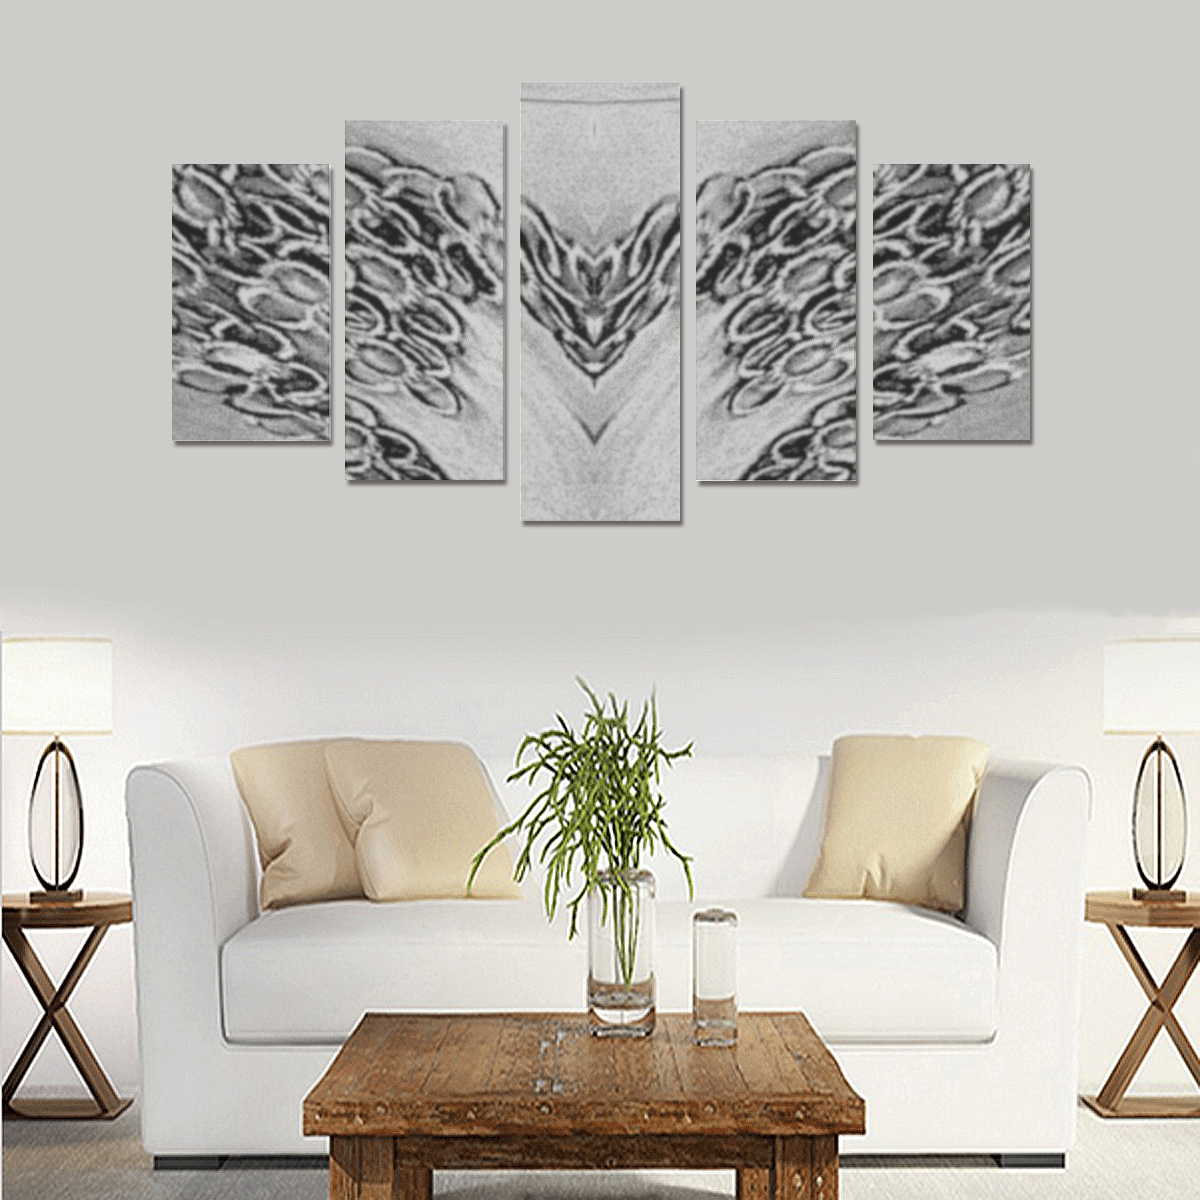 wings of calm and love Canvas Print Sets A (No Frame)